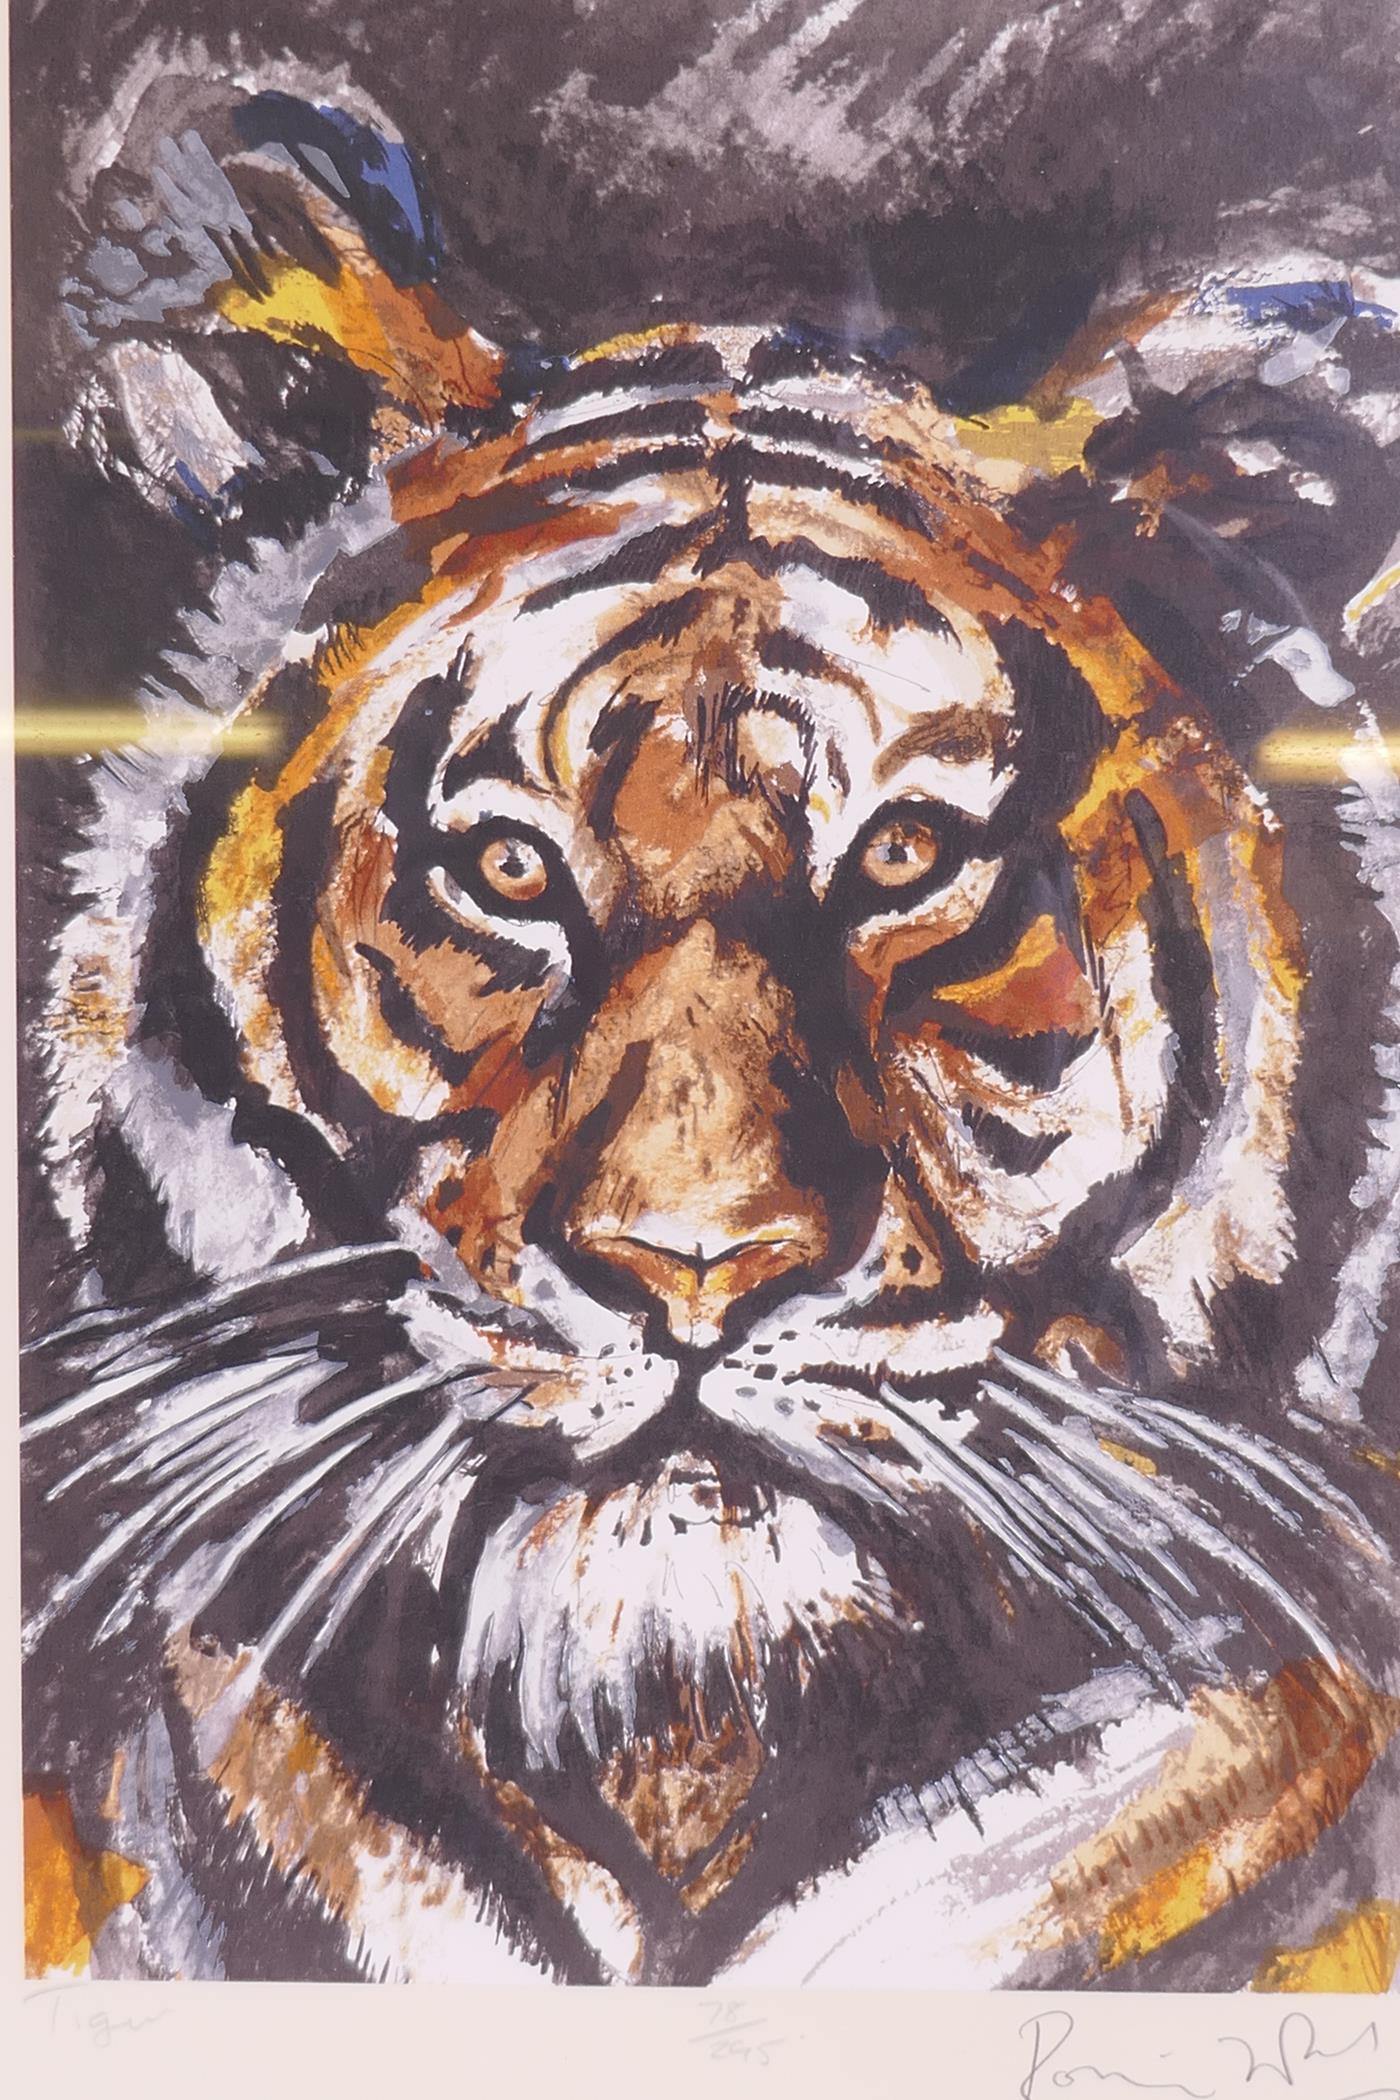 Ronnie Wood - Rolling Stones signed limited edition screen print, Tiger, 78/295, published 1995 by